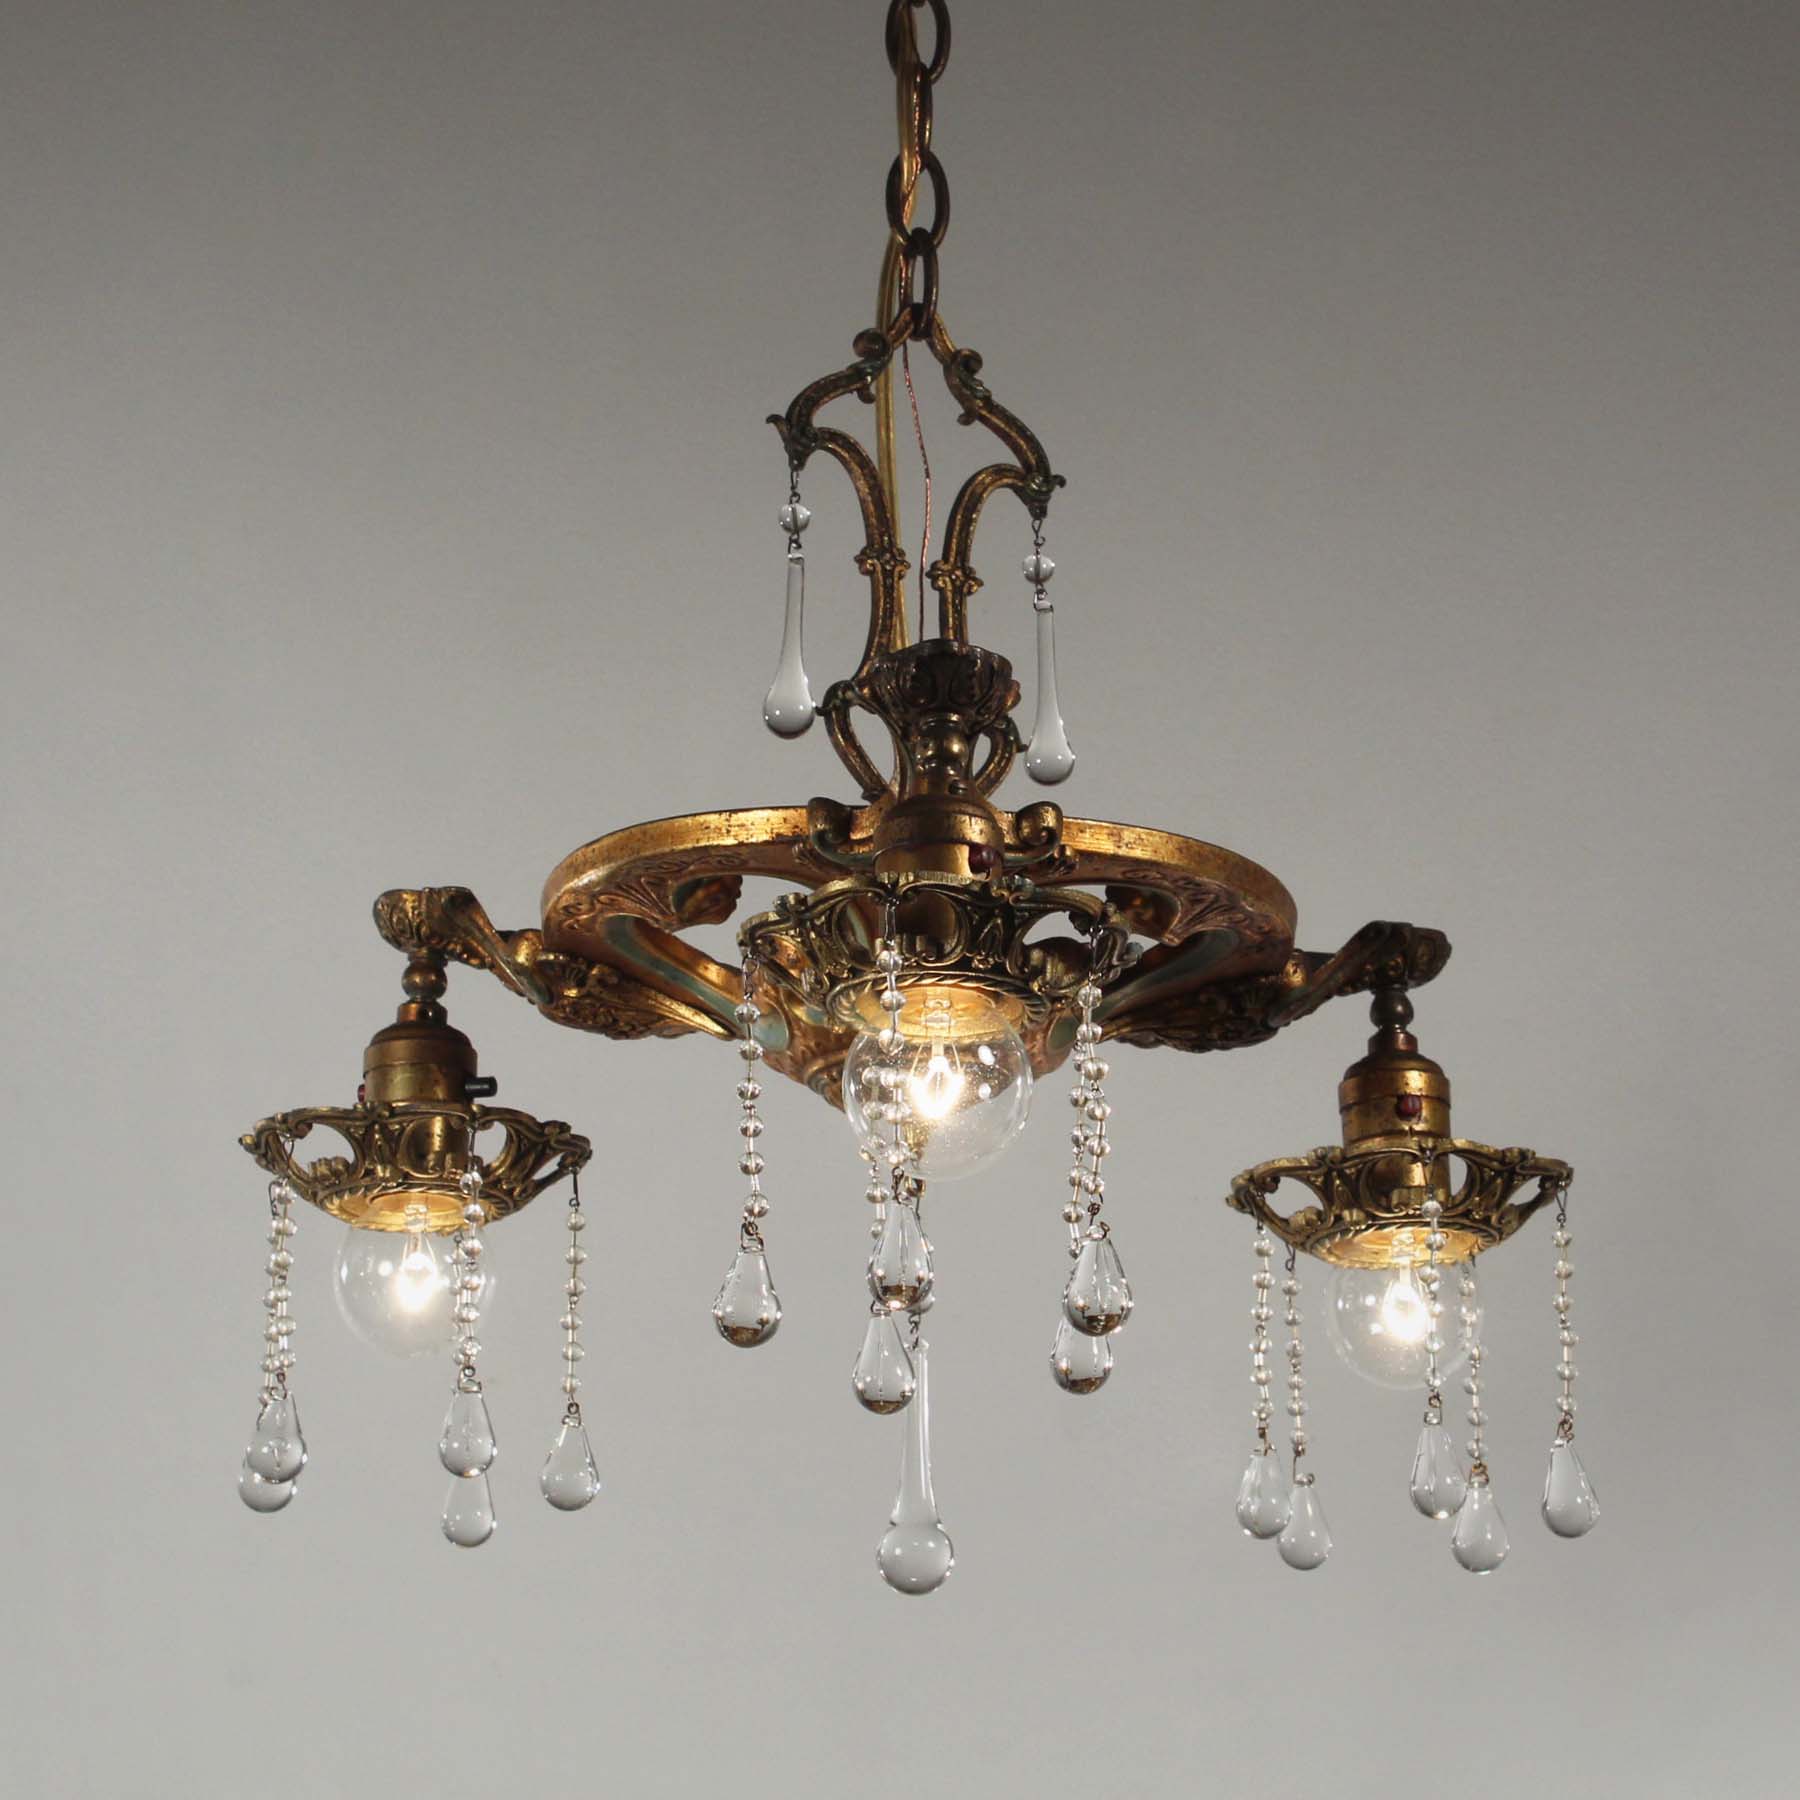 SOLD Antique Chandelier with Unusual Prisms, Early 1900s-67410